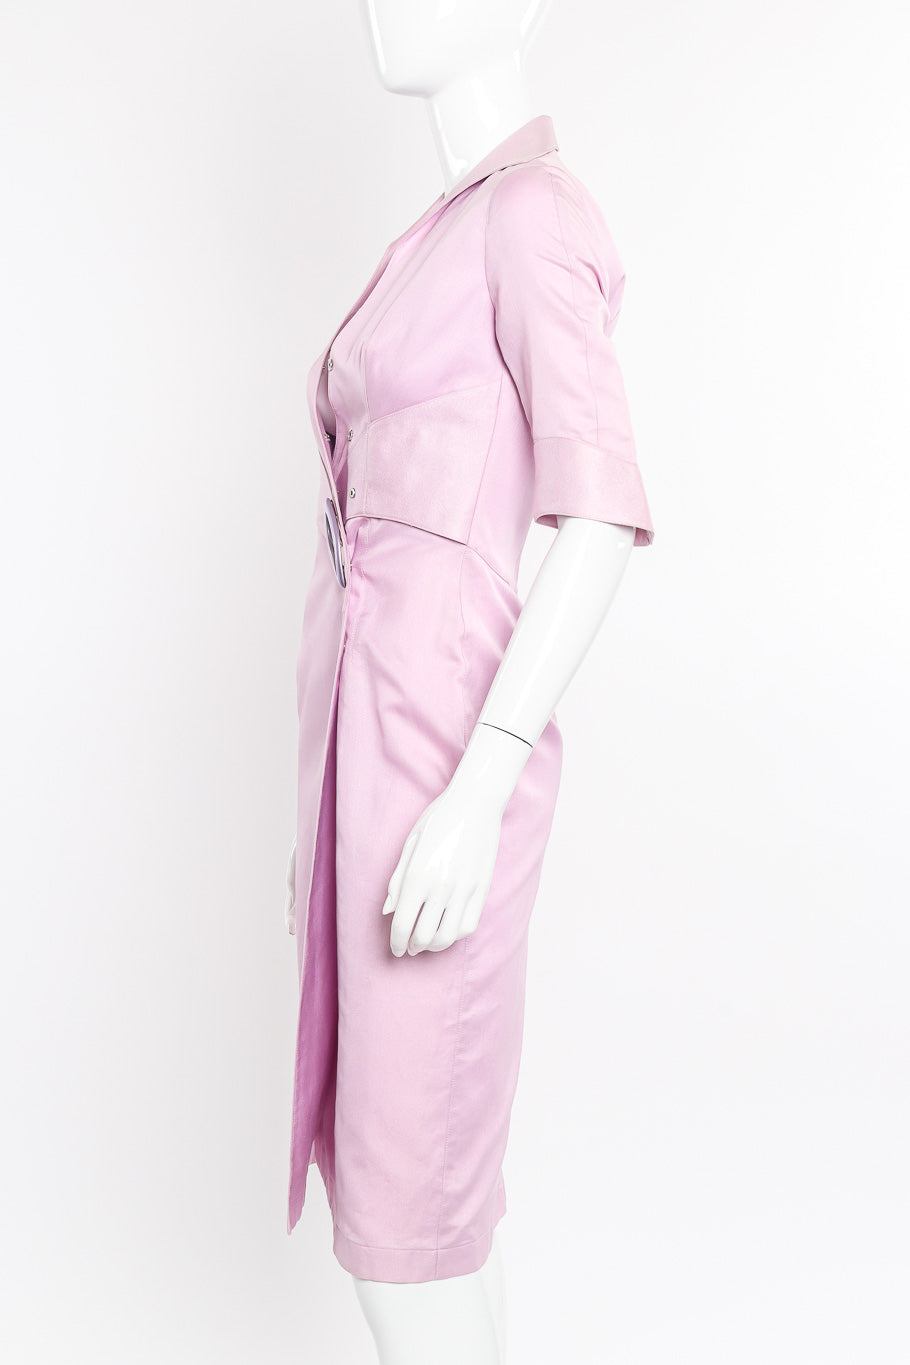 Lilac wrap dress by Thierry Mugler on mannequin side @recessla